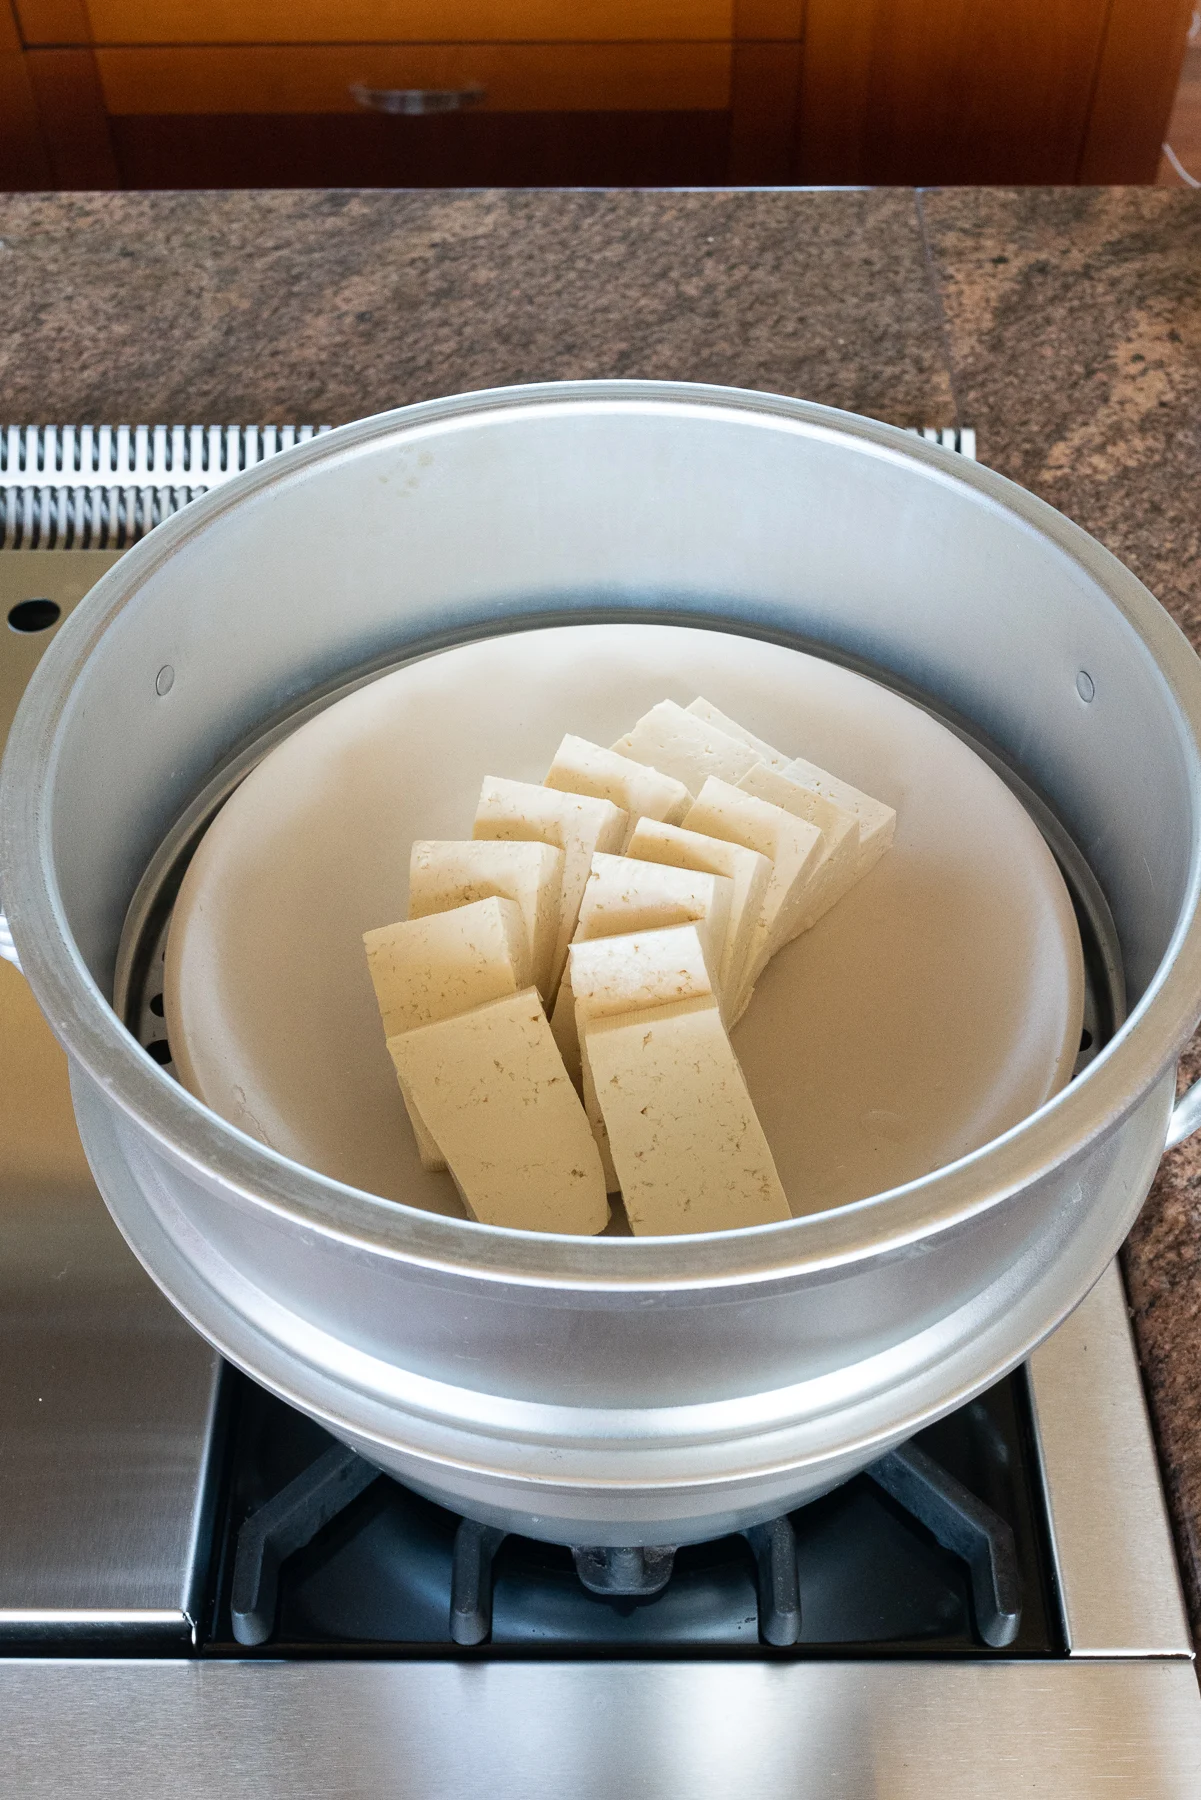 A plate of sliced tofu in the steamer, getting ready to steam.